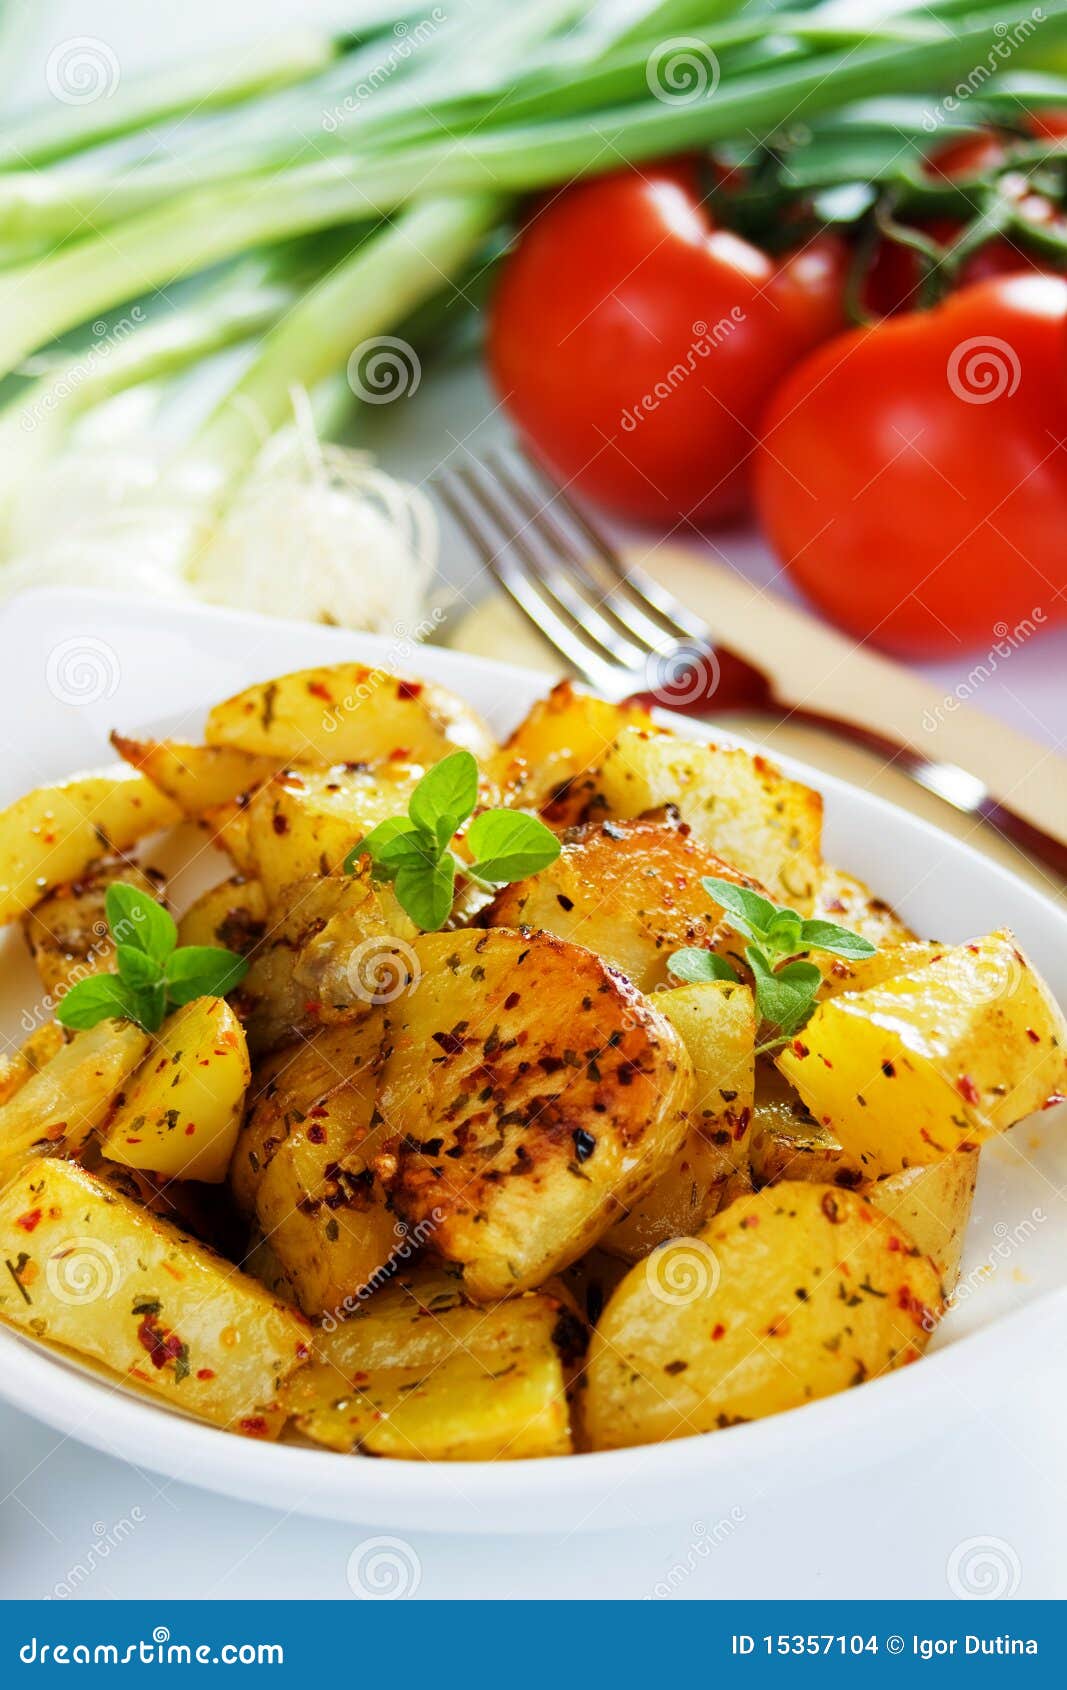 well spiced roasted potato slices